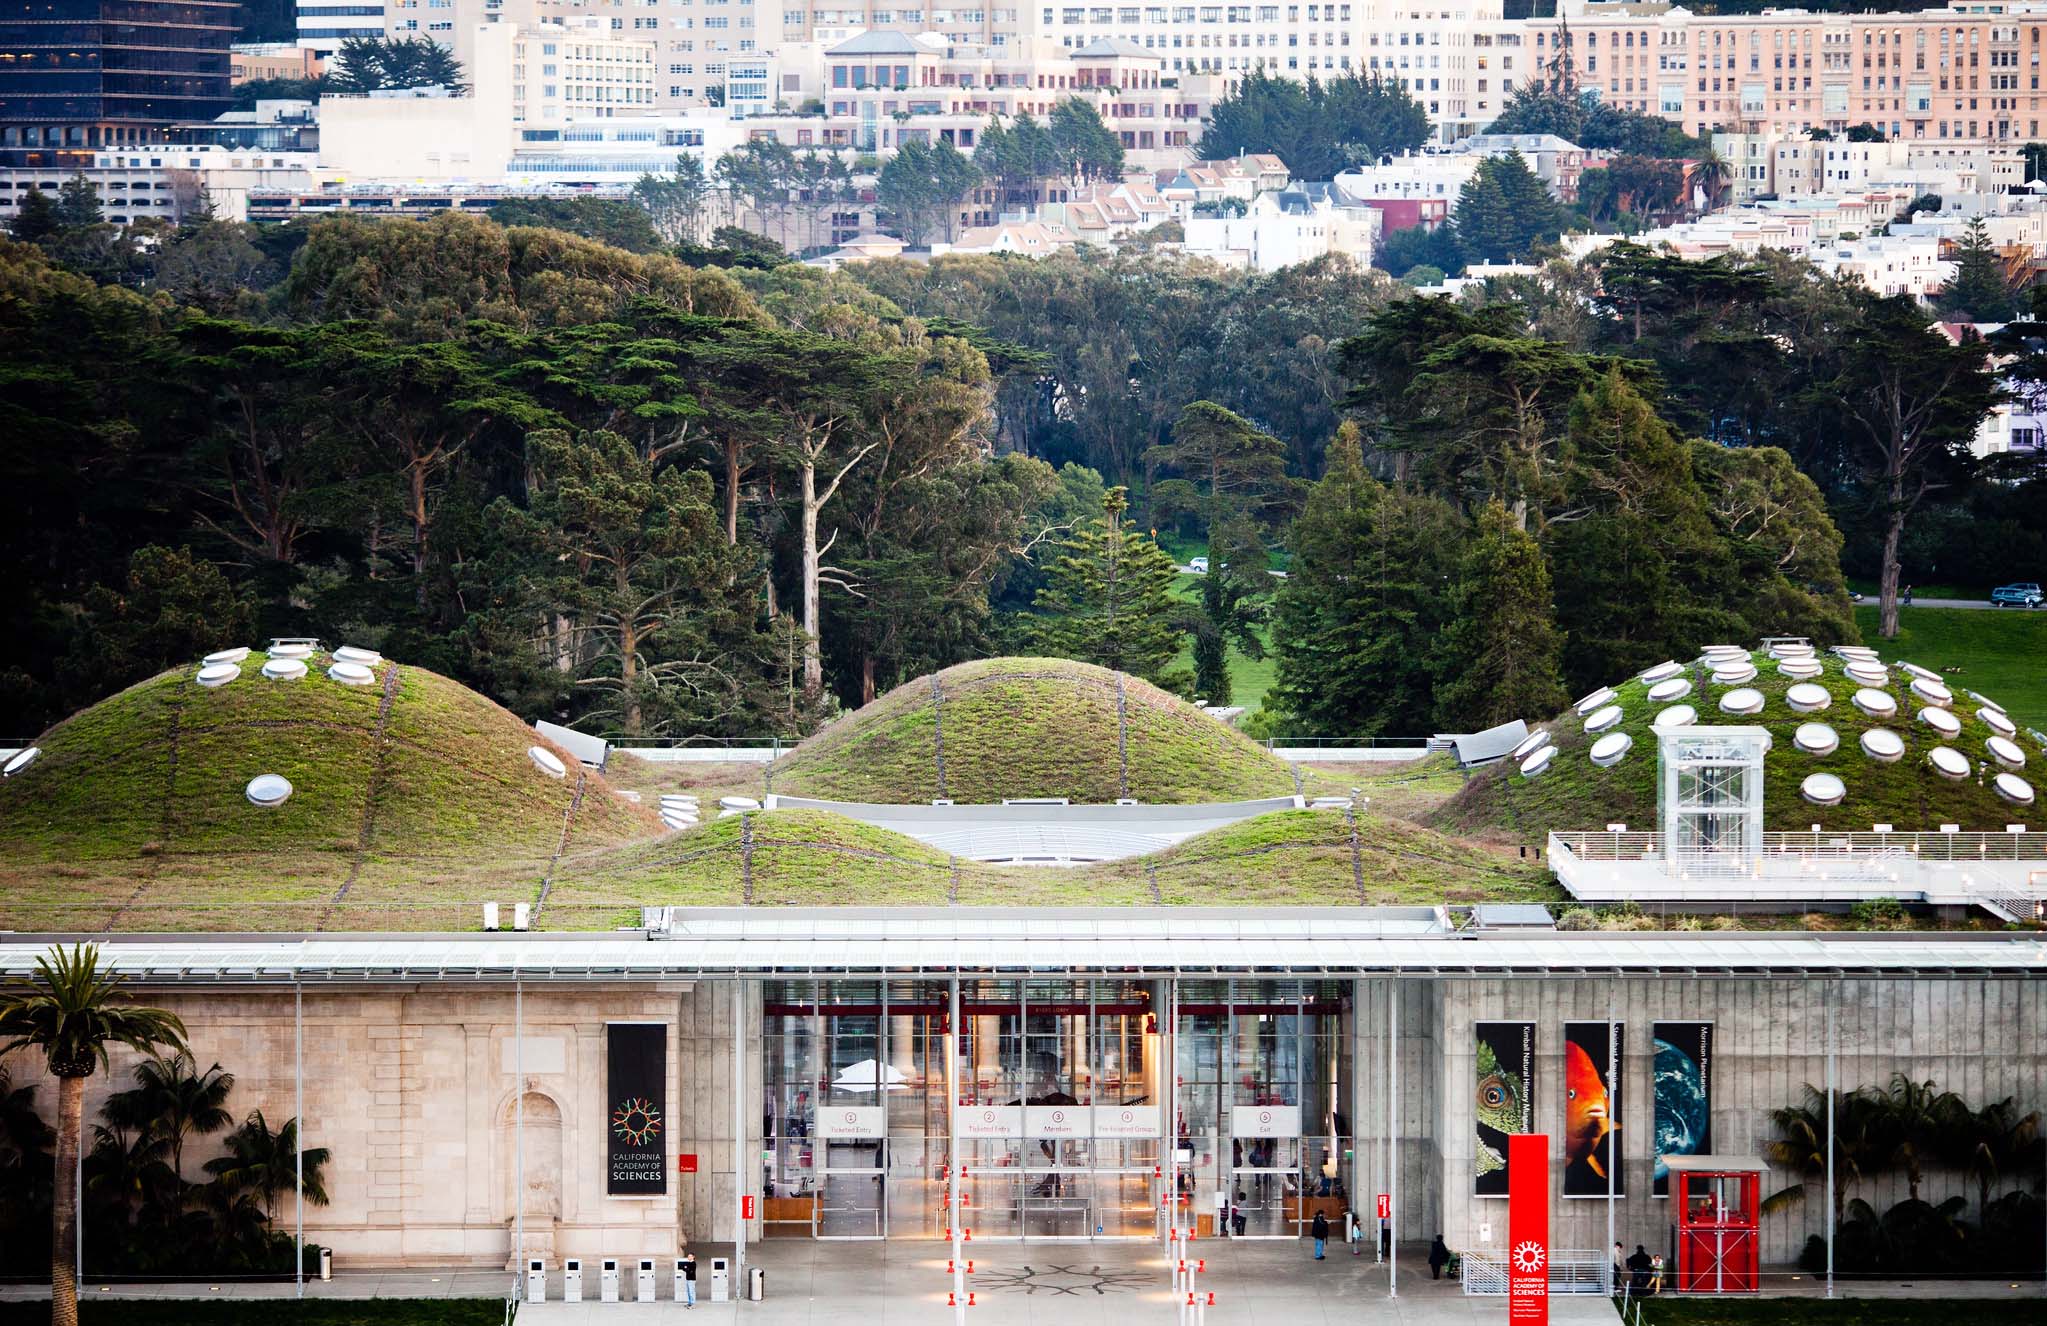 Looking across at the museum building, with the green roof visible above the entryway and a park and city buildings in the background.